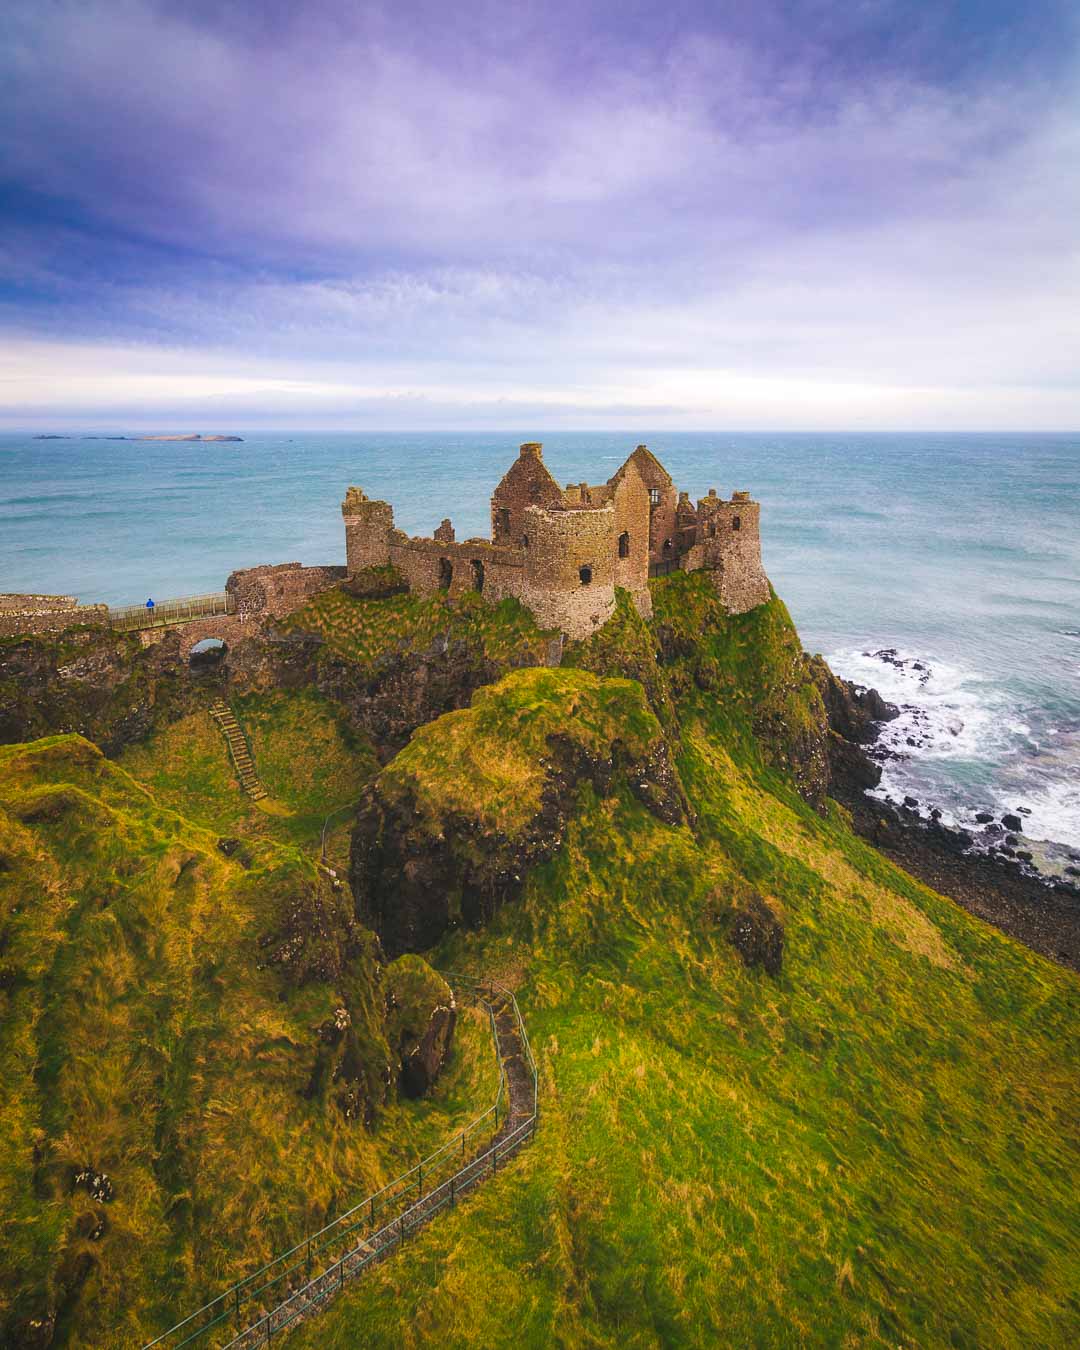 dunluce castle on the cliffs of northern ireland